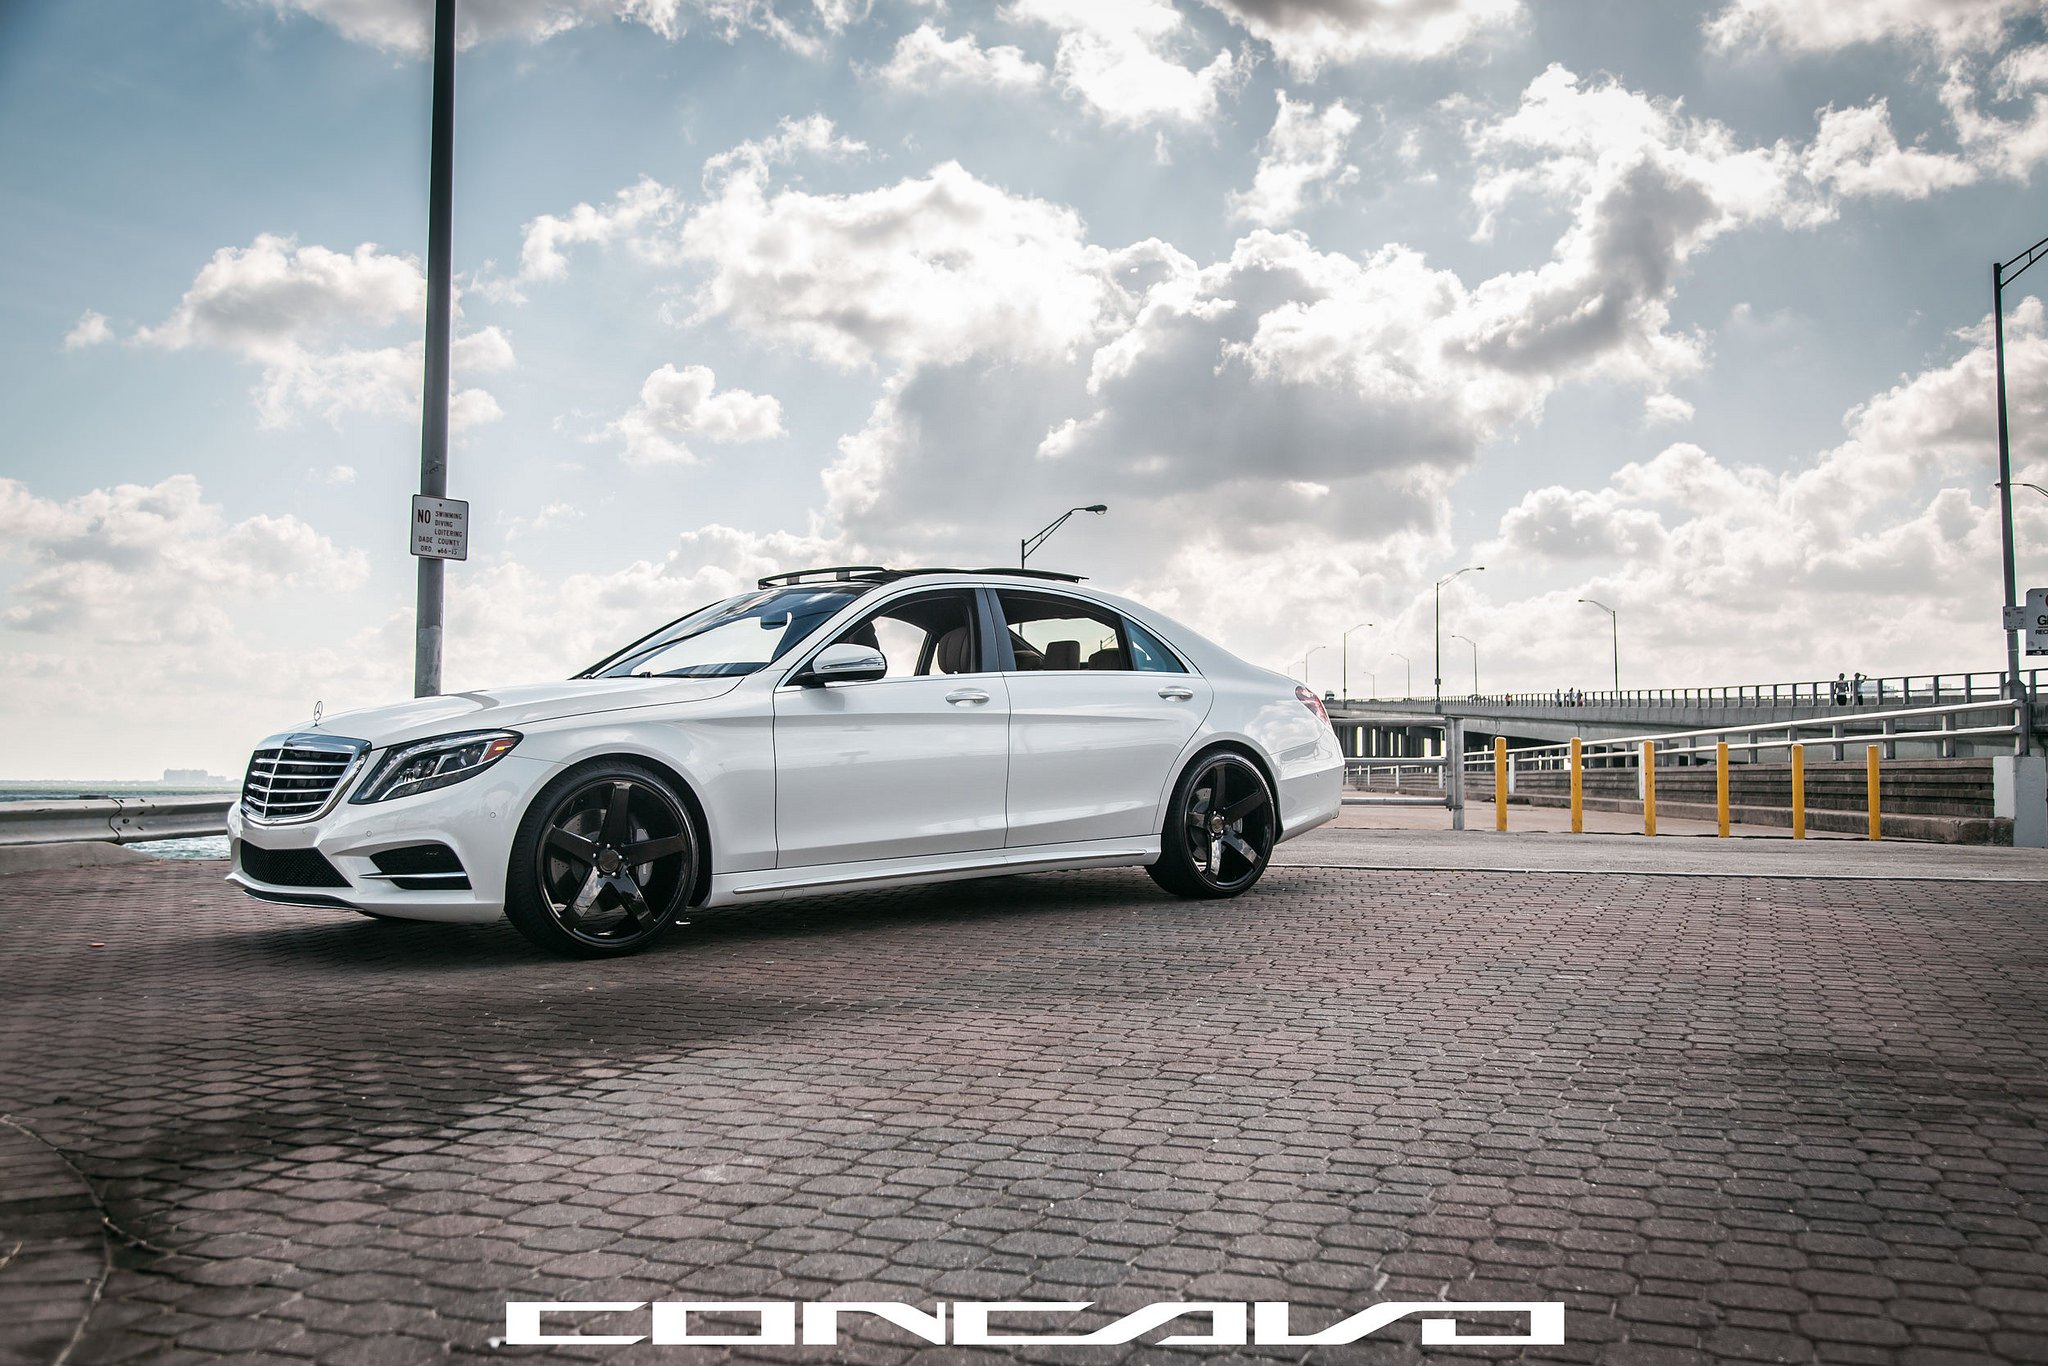 mercedes, Benz, S550, Tuning, Concavo, Wheels, Cars Wallpaper